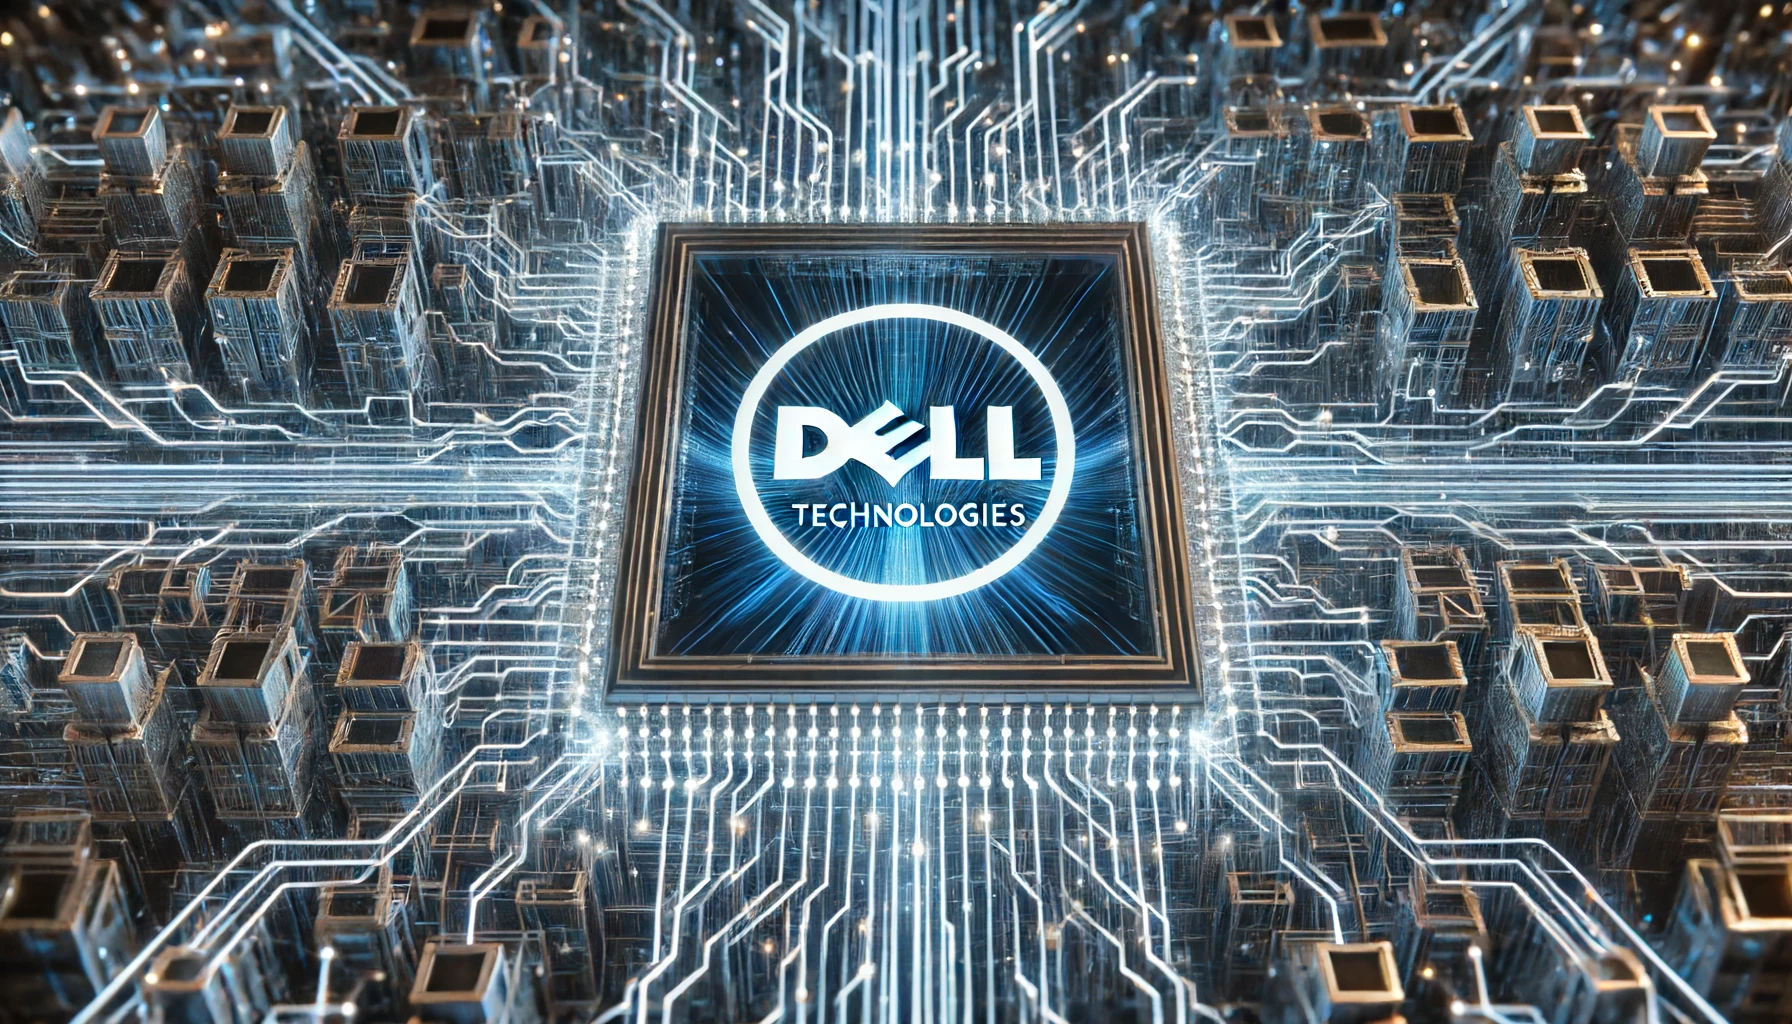 Dell Technologies continues to make progress in quantum computing efforts